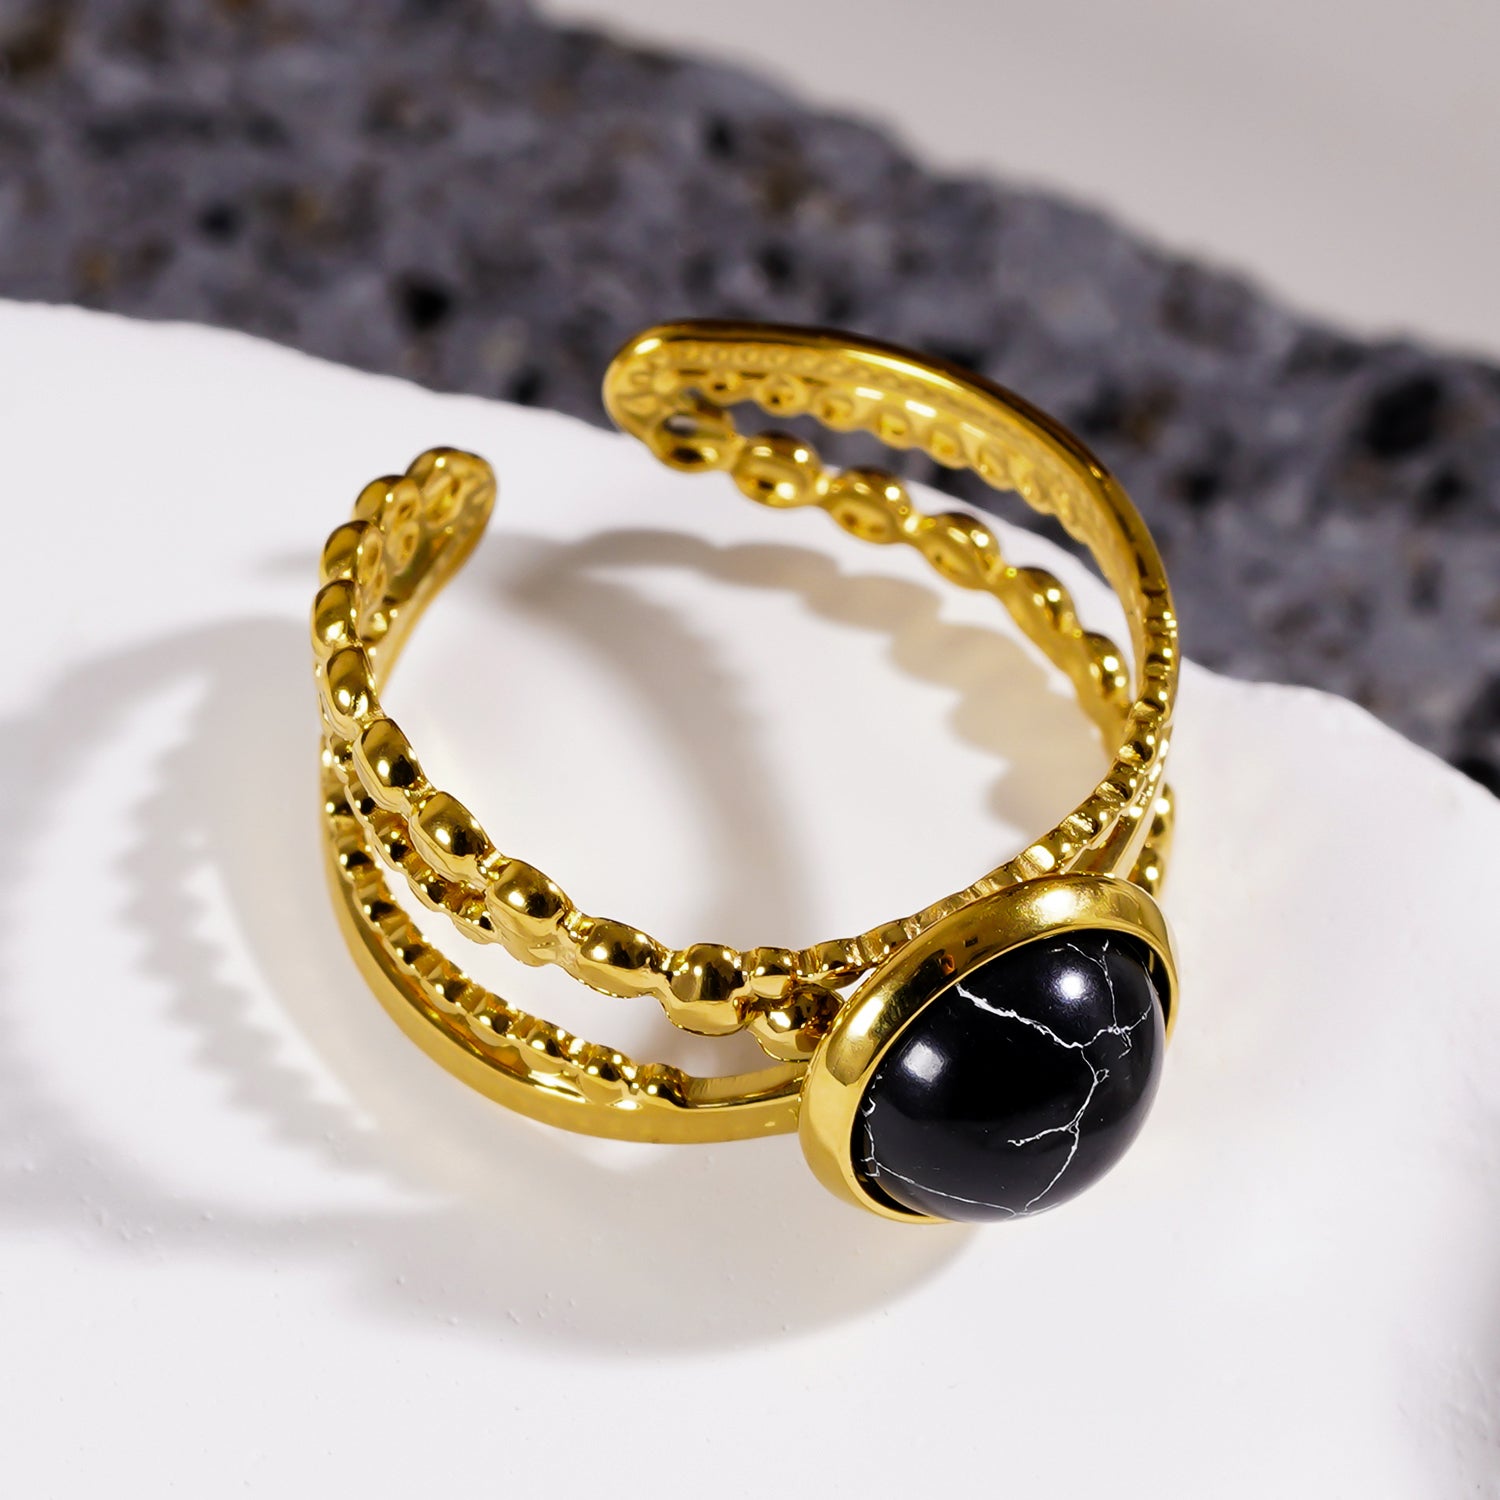 Style MALAYA 0111: Cross Over Stacked Ring with a Black Turquoise Stone Centrepiece.